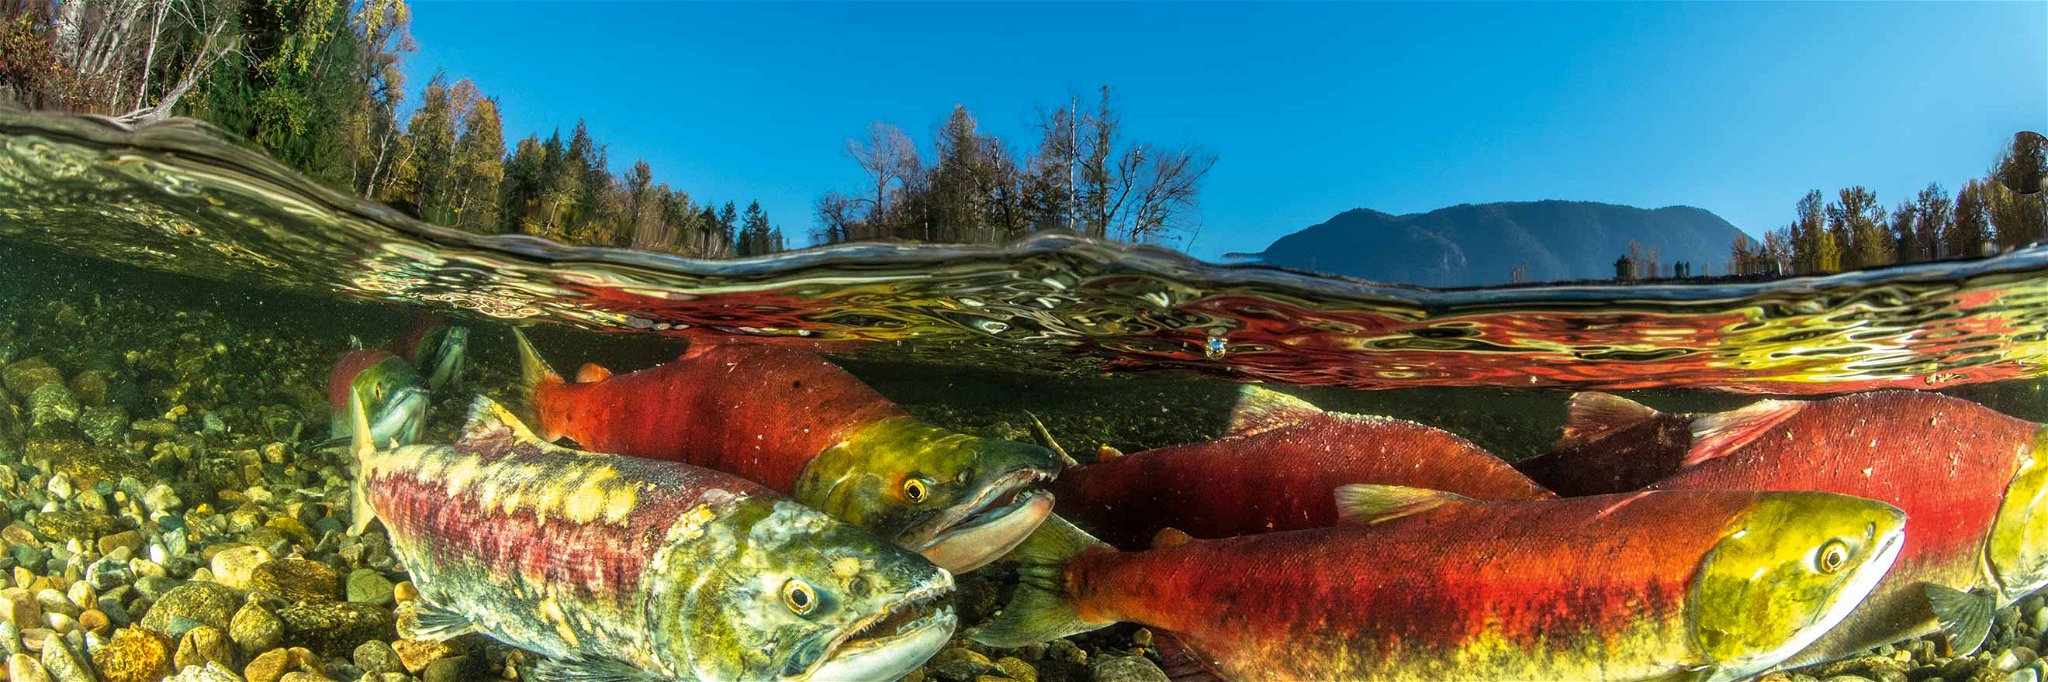 Sockeye salmon turn bright red&nbsp;when they head&nbsp;up river to spawn.